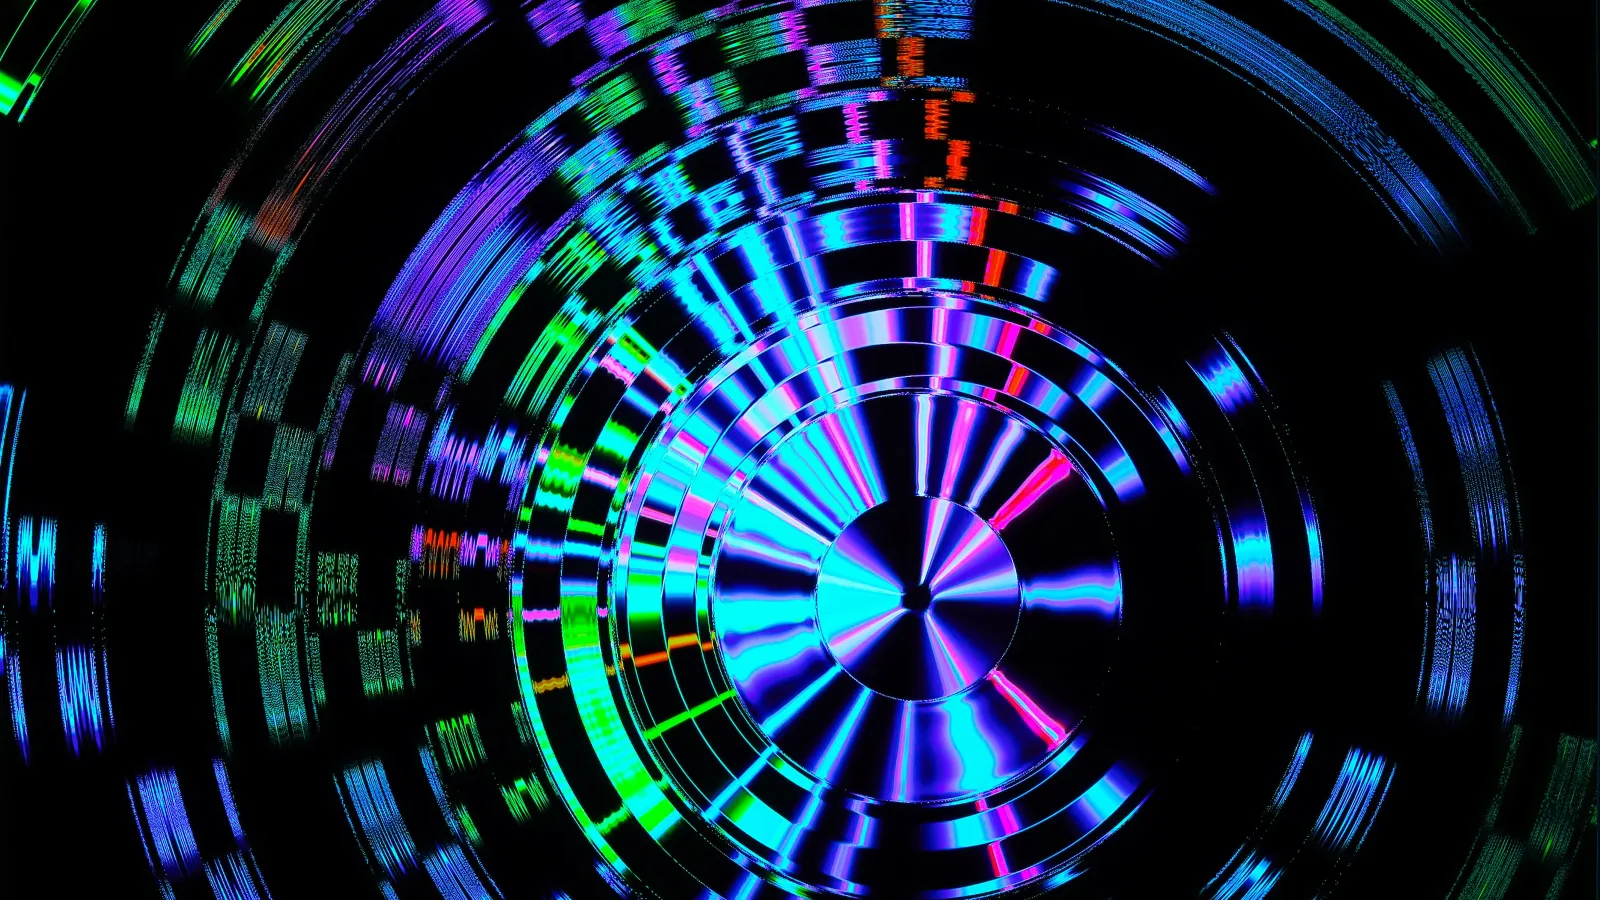 a circular object with colorful lights